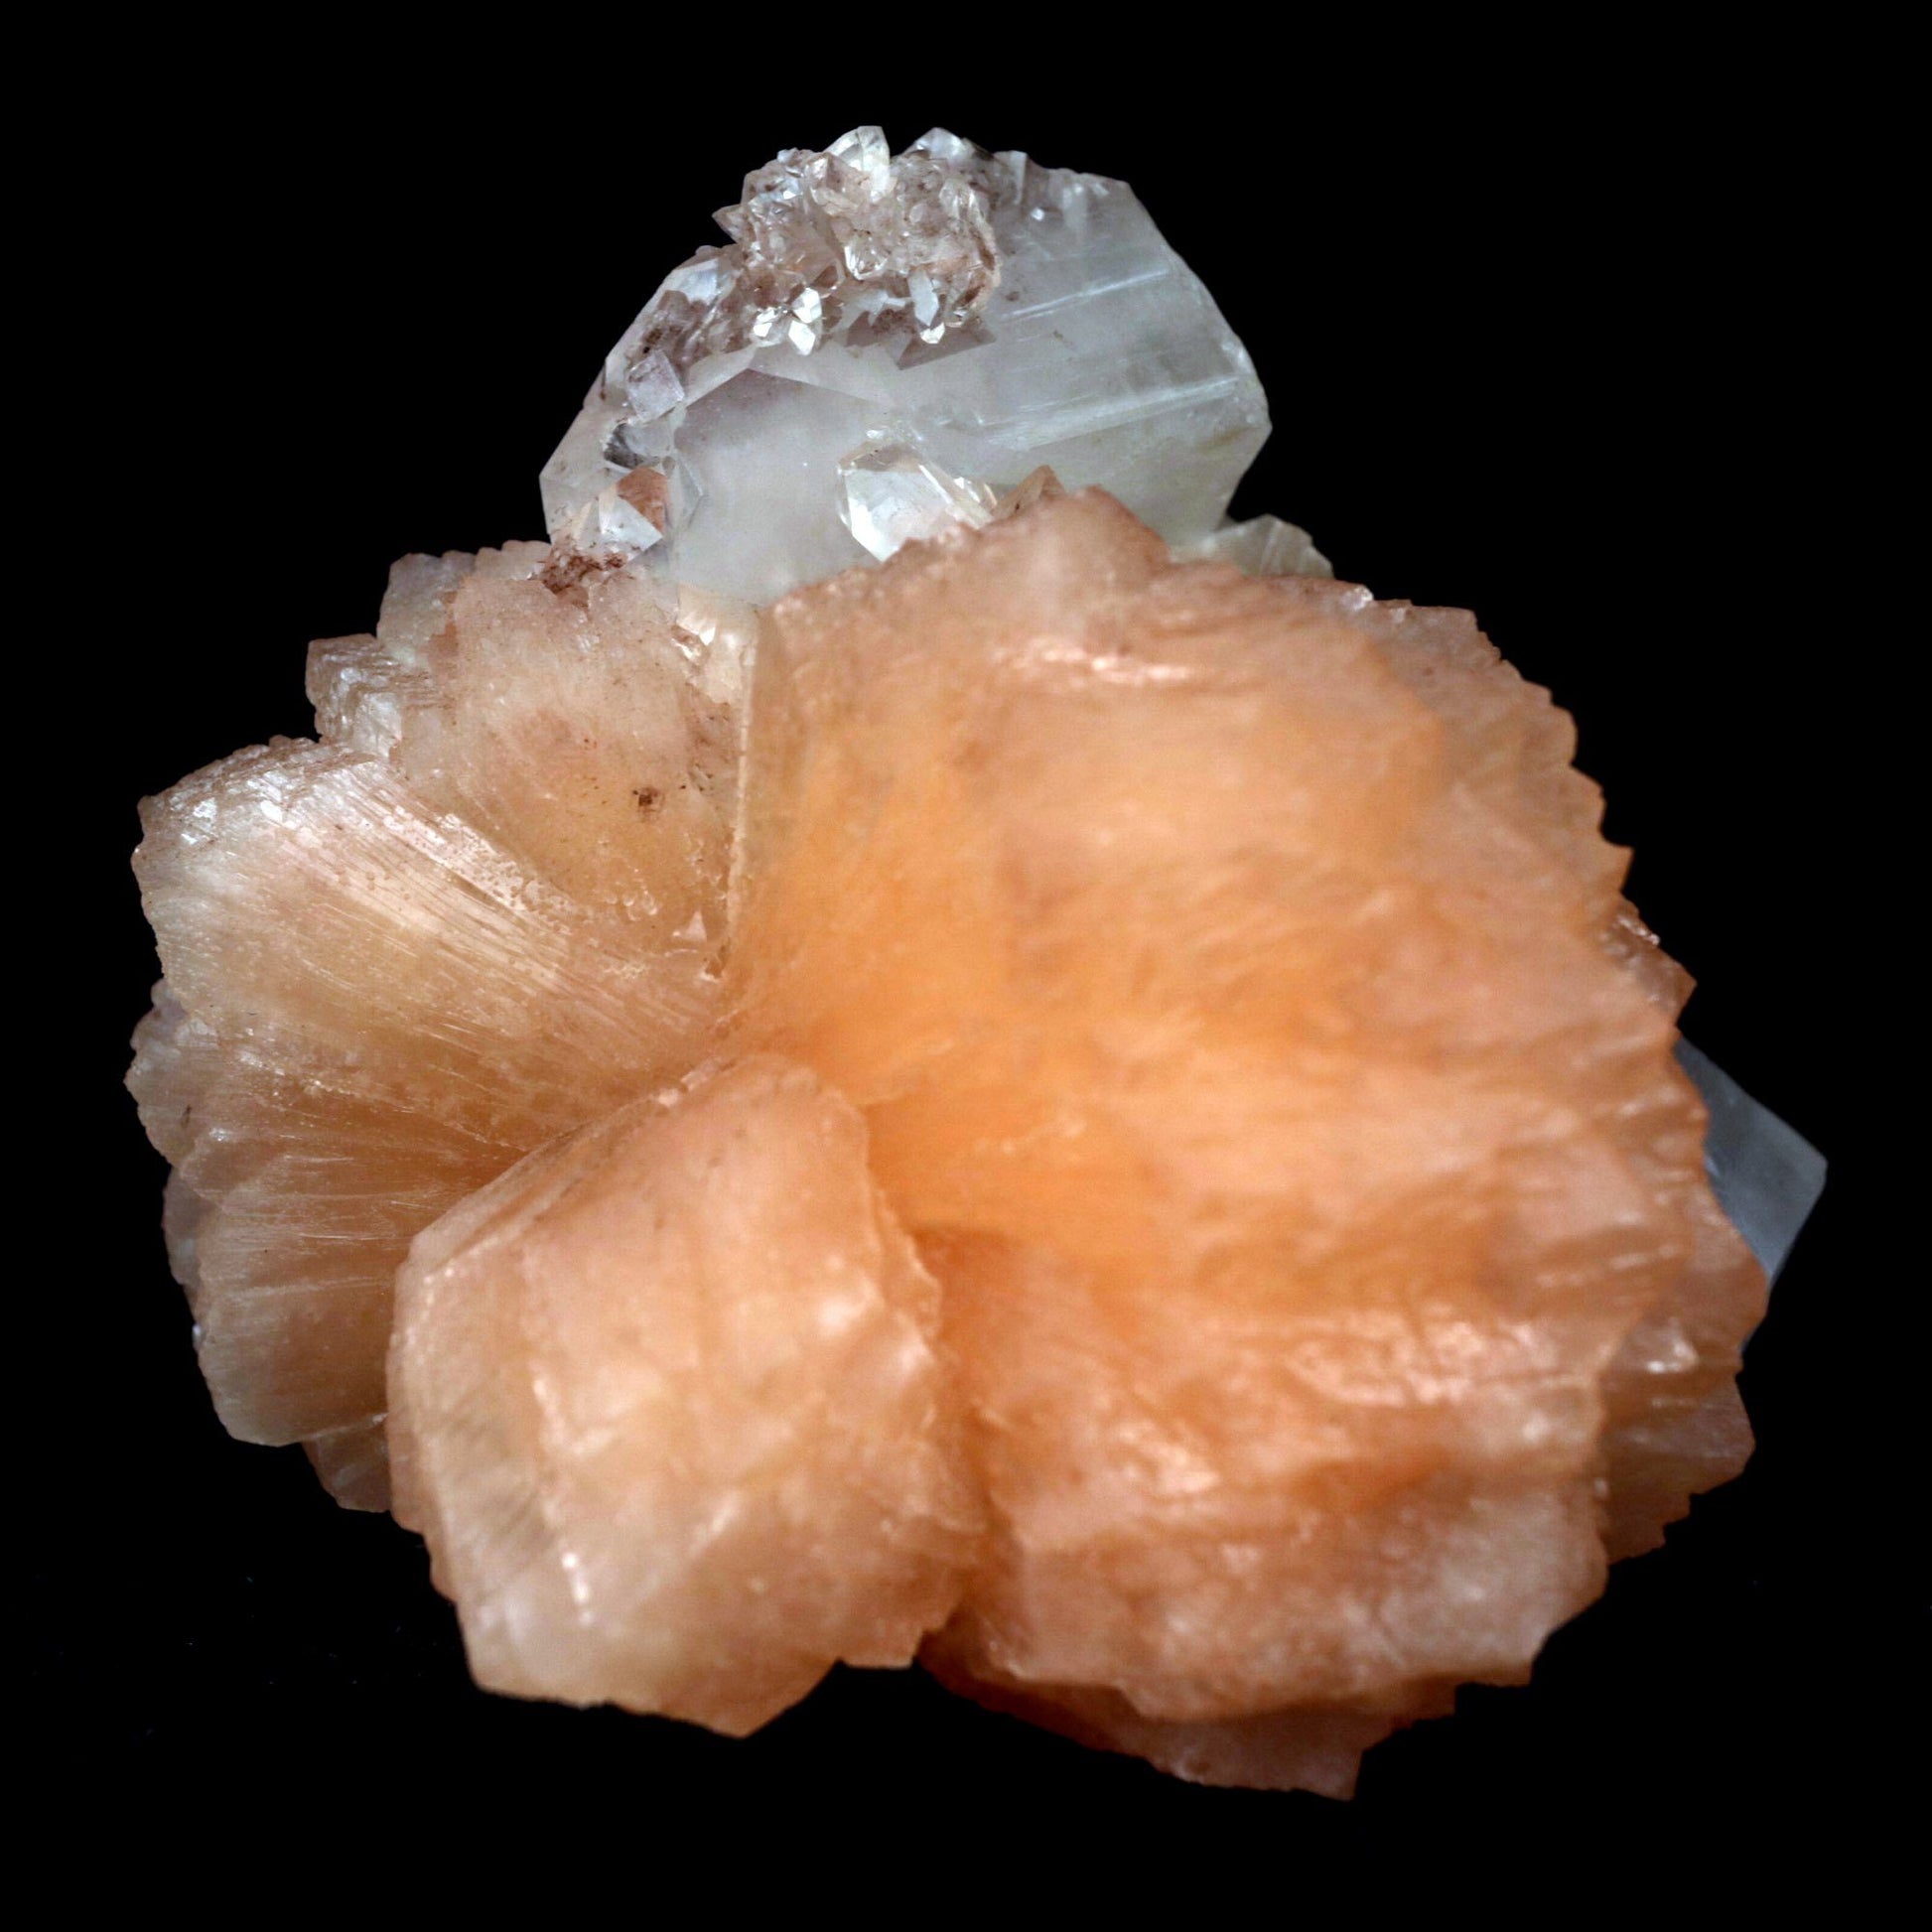 Apophyllite With Stilbite Perfect Bow-Tie formation Natural Mineral Sp…  https://www.superbminerals.us/products/apophyllite-with-stilbite-perfect-bow-tie-formation-natural-mineral-specimen-b-4796  Features: A stunning, large&nbsp; doubly terminated stilbite bowtie with fantastic broad form is aesthetically set on the Chalcedony basalt matrix. The highly lustrous, translucent, cream-colored stilbite is wonderfully complemented by the numerous lustrous, that are peppered on the matrix.